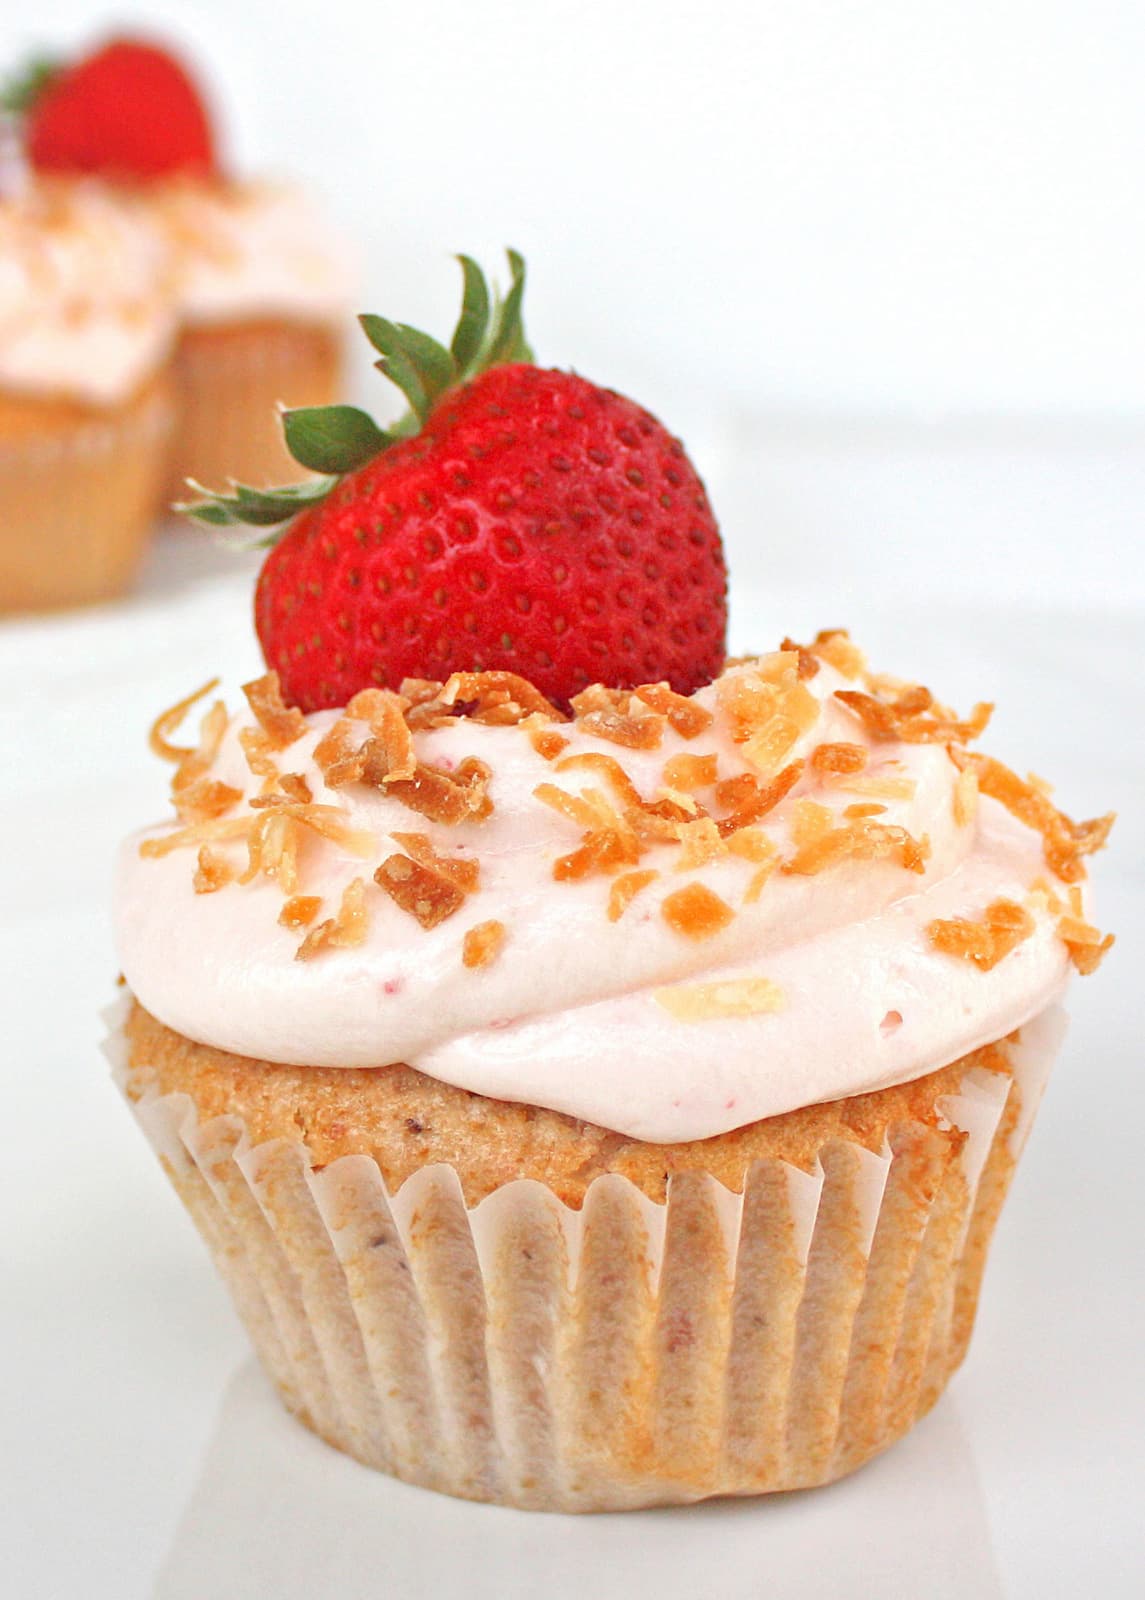 Strawberry Colada Cupcakes - Strawberry and coconut cupcakes topped with toasted coconut! the-girl-who-ate-everything.com